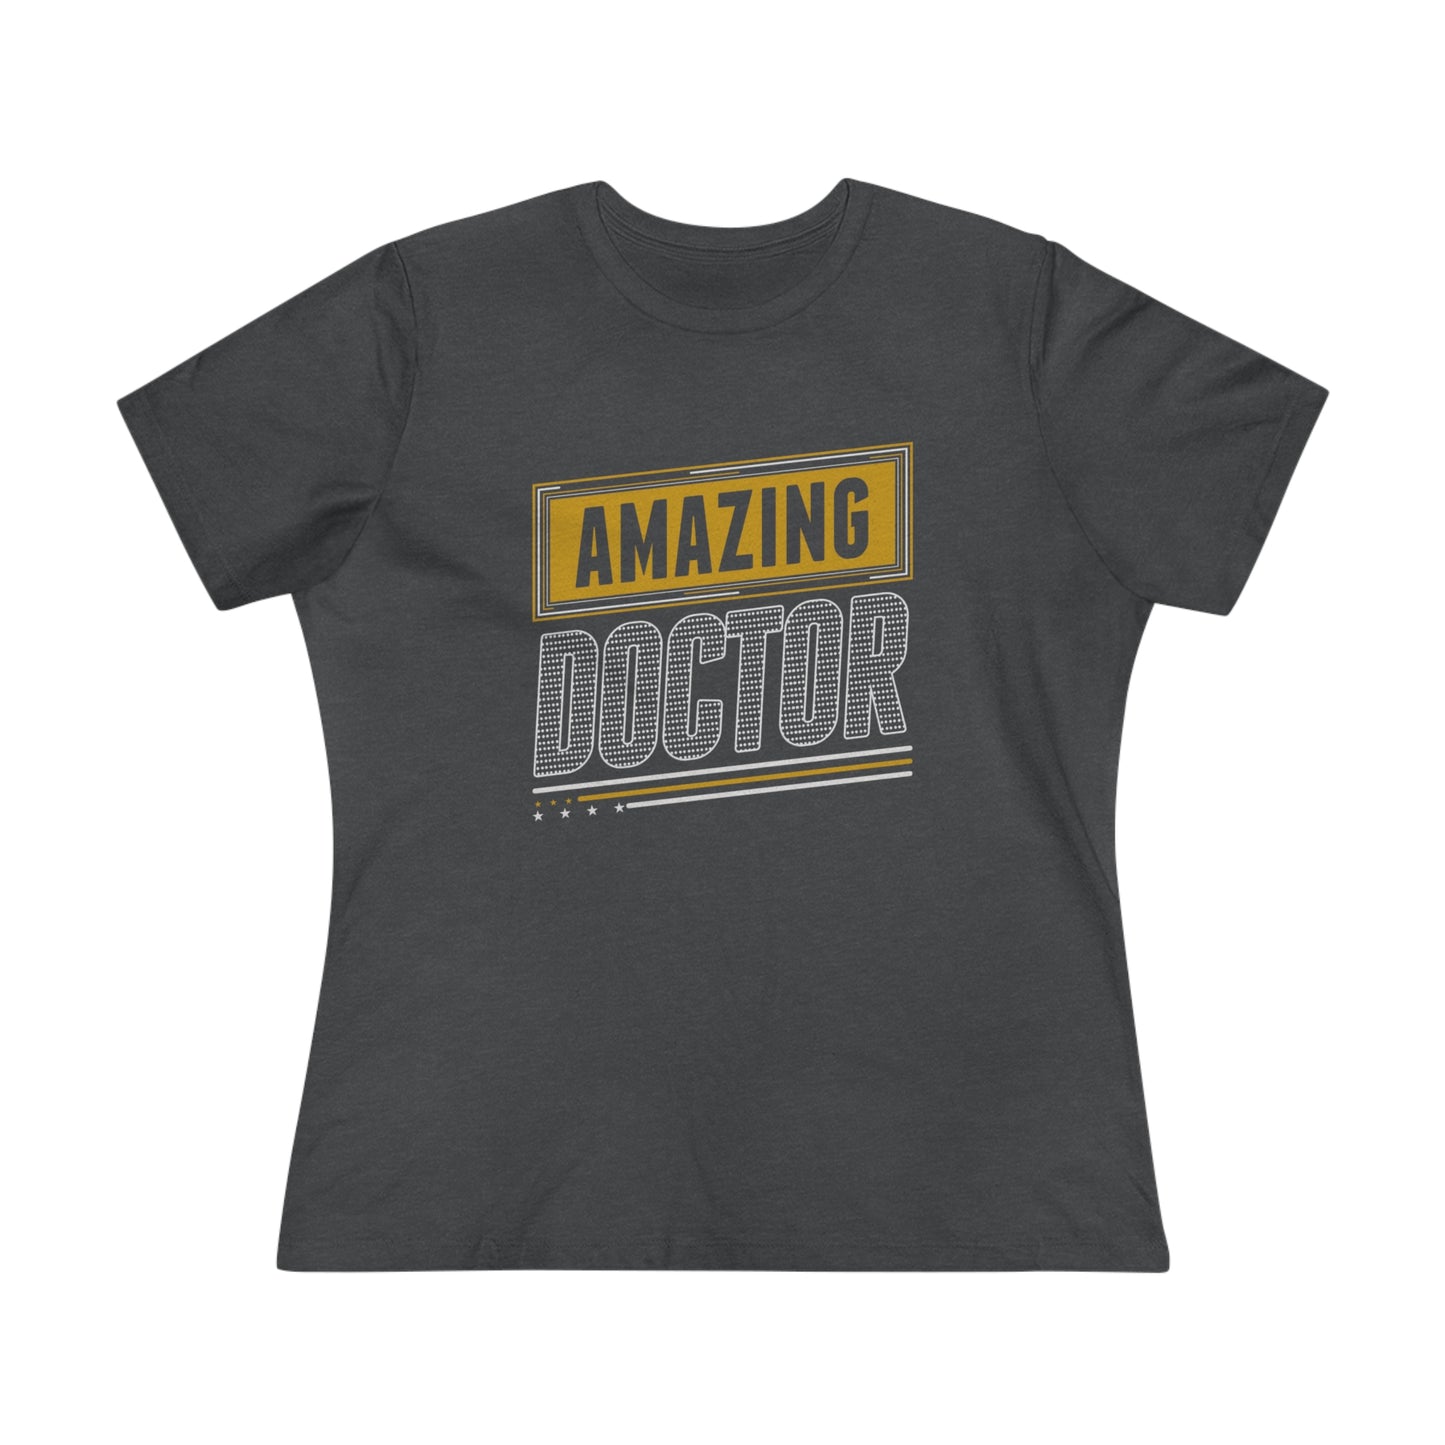 Amazing Doctor Women's Premium Tee, Doctor shirts, Doctor gift ideas, Future Doctor Shirt, gift for doctors, women shirt with doctor design